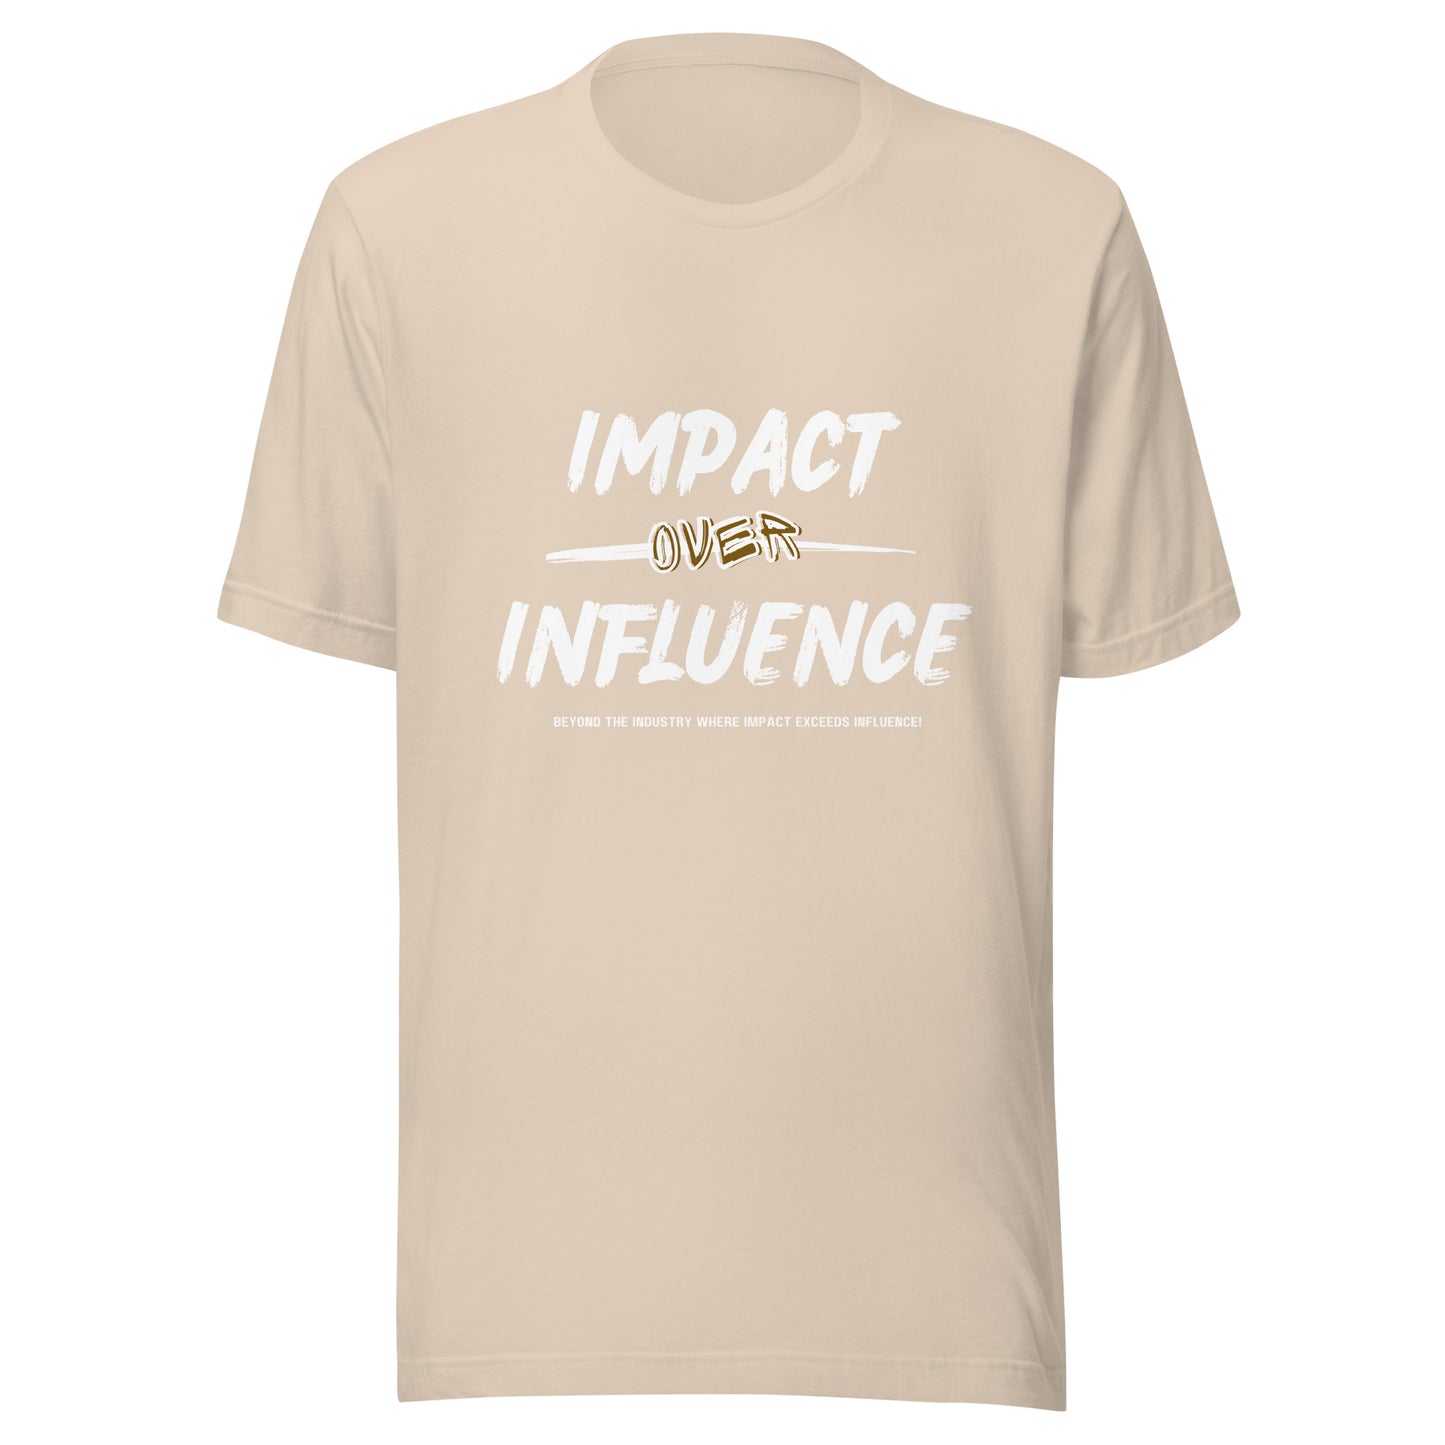 IMPACT OVER INFLUENCE (BROWN/CREAM)